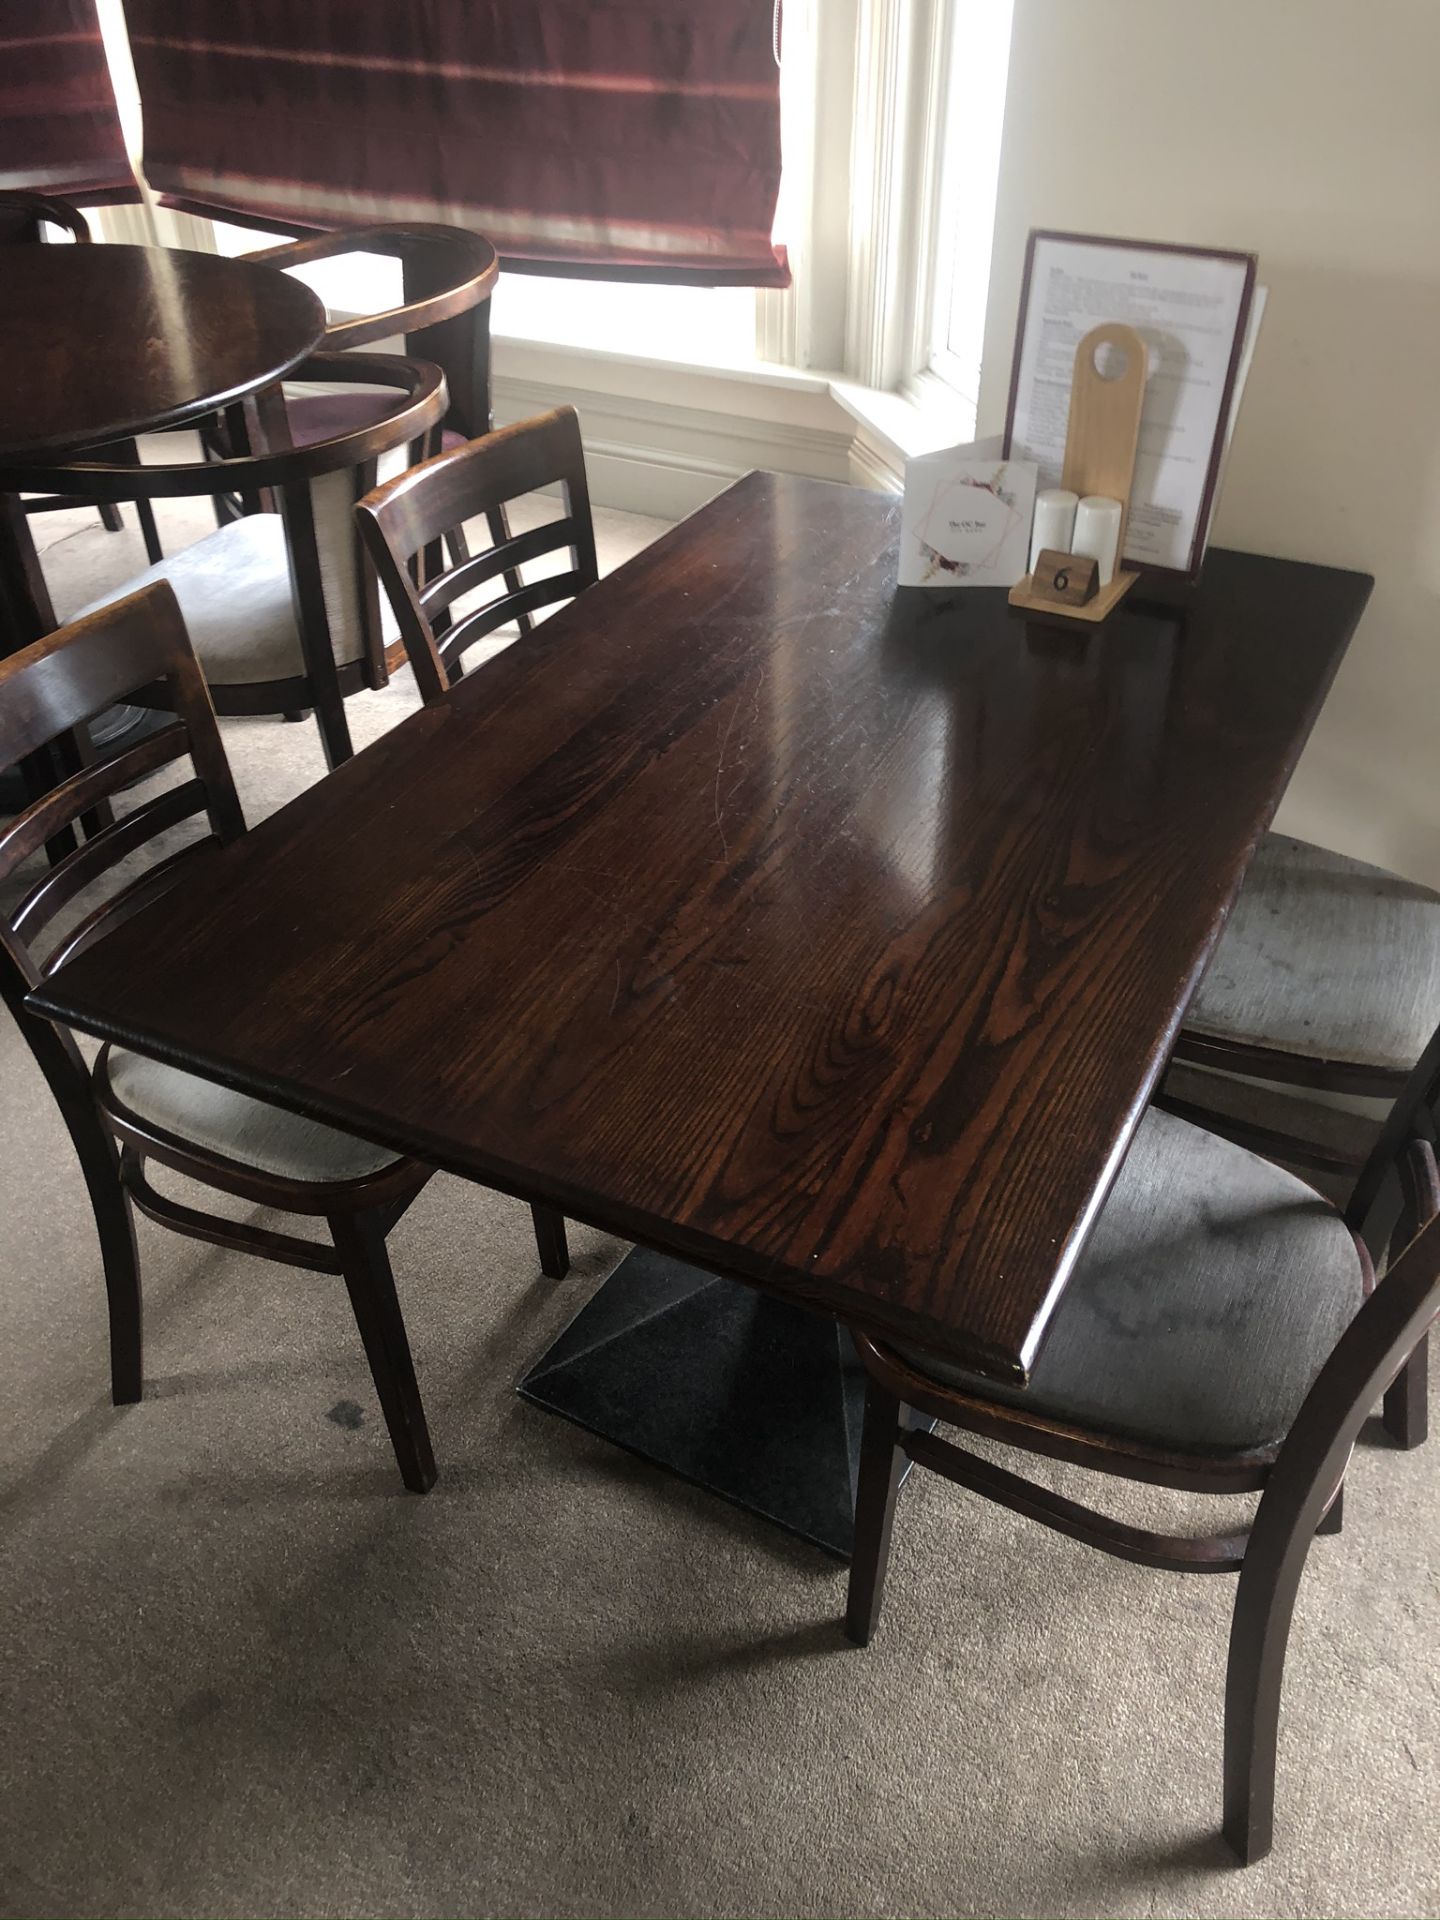 10 x Wooden Dining Tables - Image 6 of 10